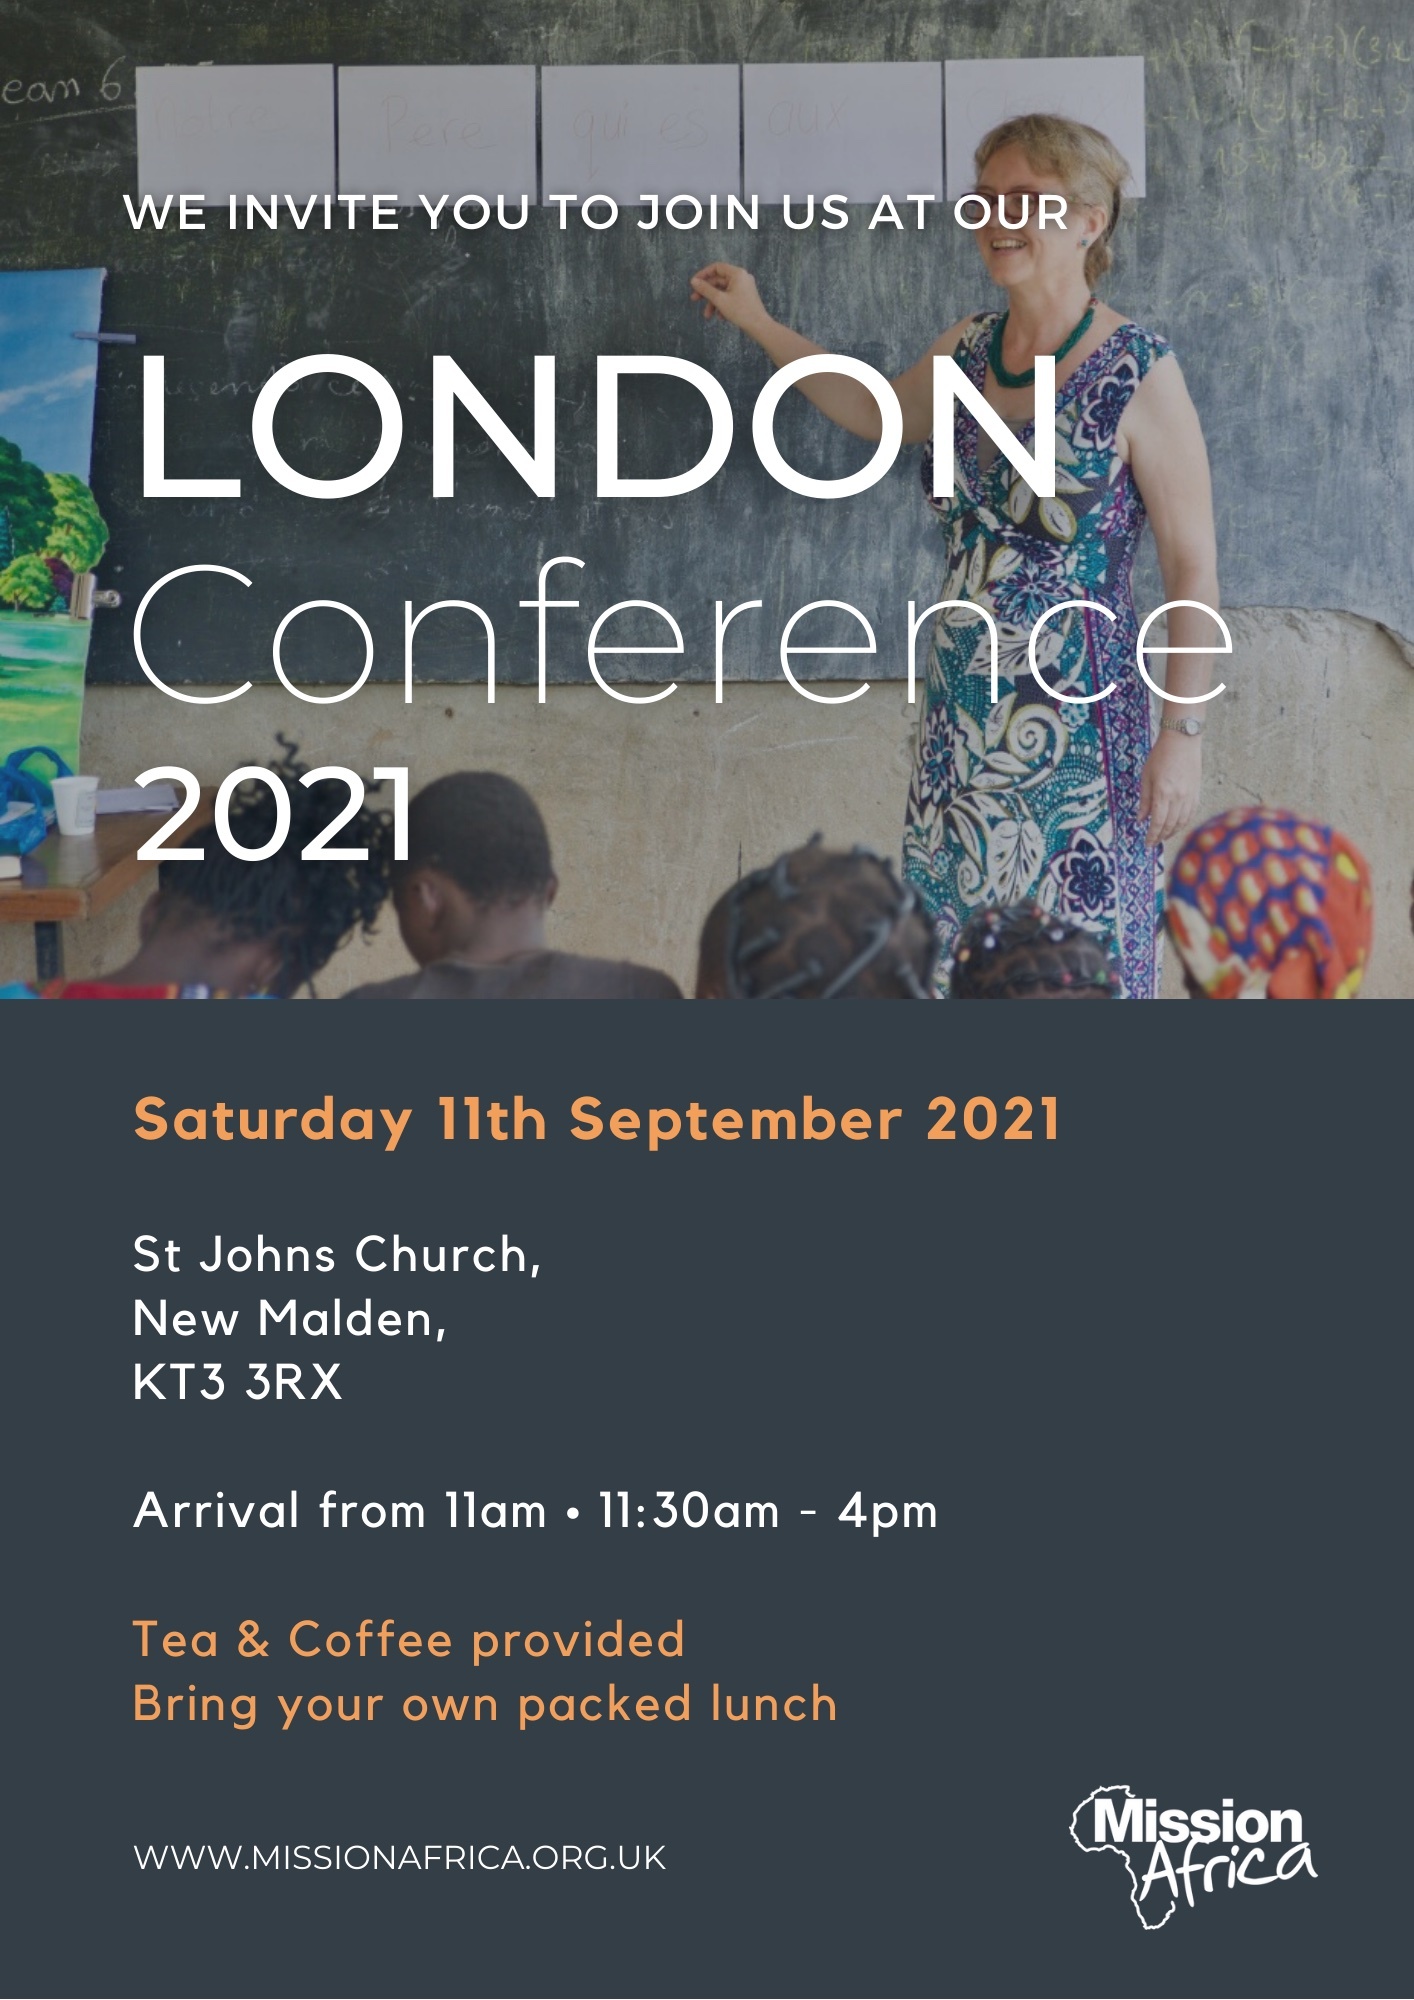 London Conference 2021 Mission Africa